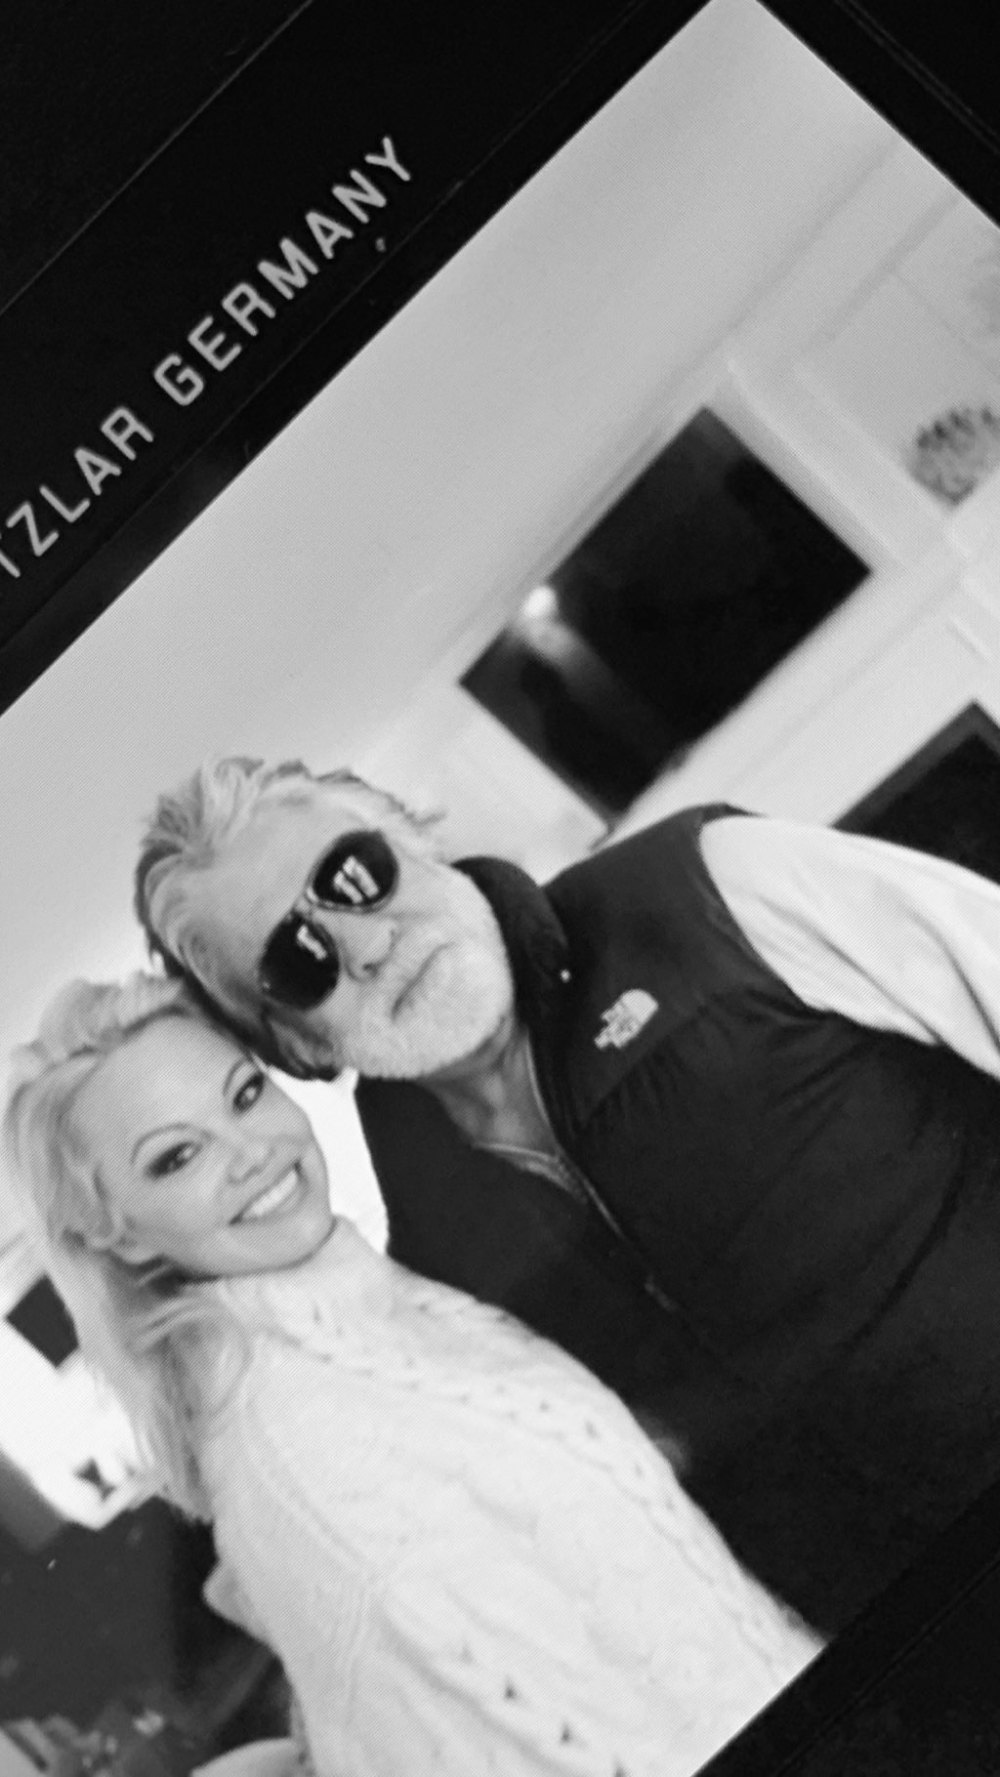 Pamela Anderson Shares 1st Photo With New Husband Jon Peters